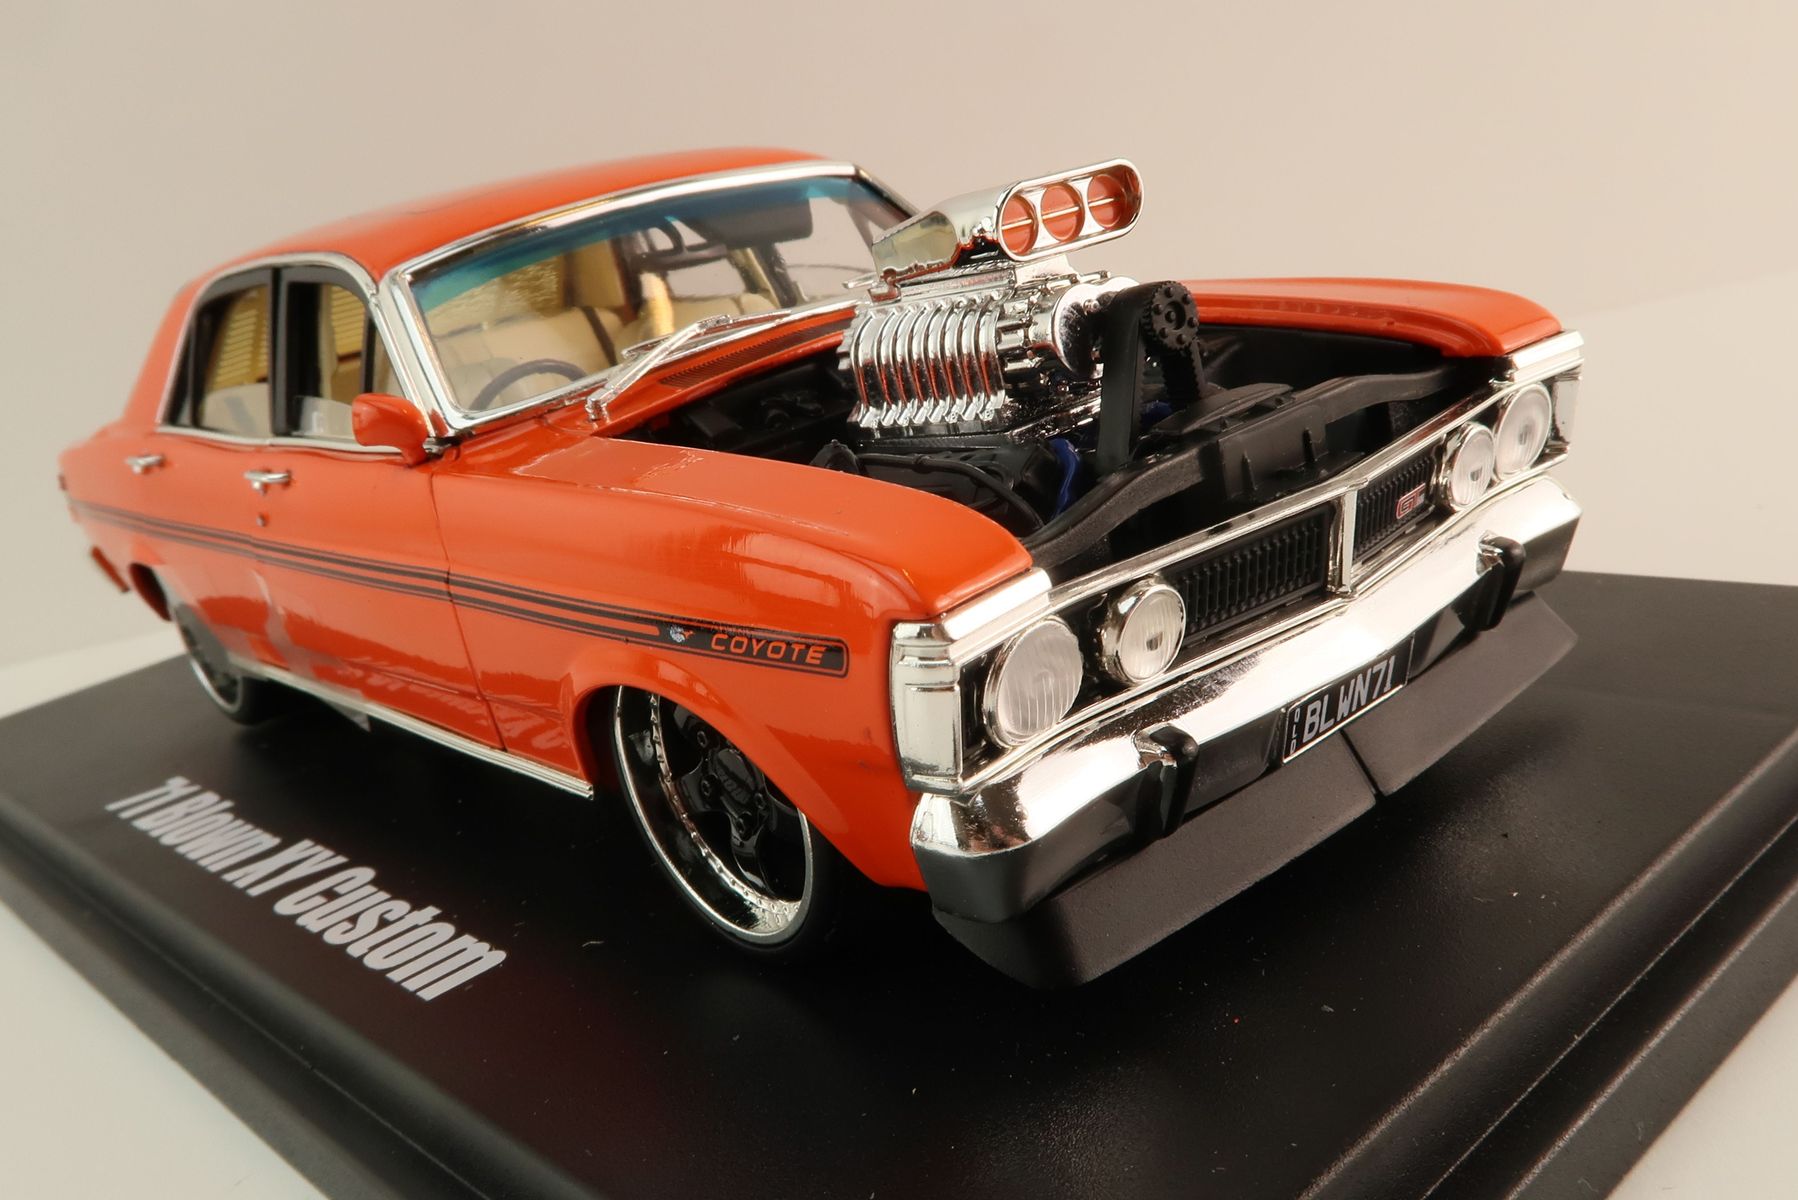 Product Image - DDA Collectibles DDA24826 - Ford Falcon XY GTHO Slammed and Supercharged Orange - Scale 1:24